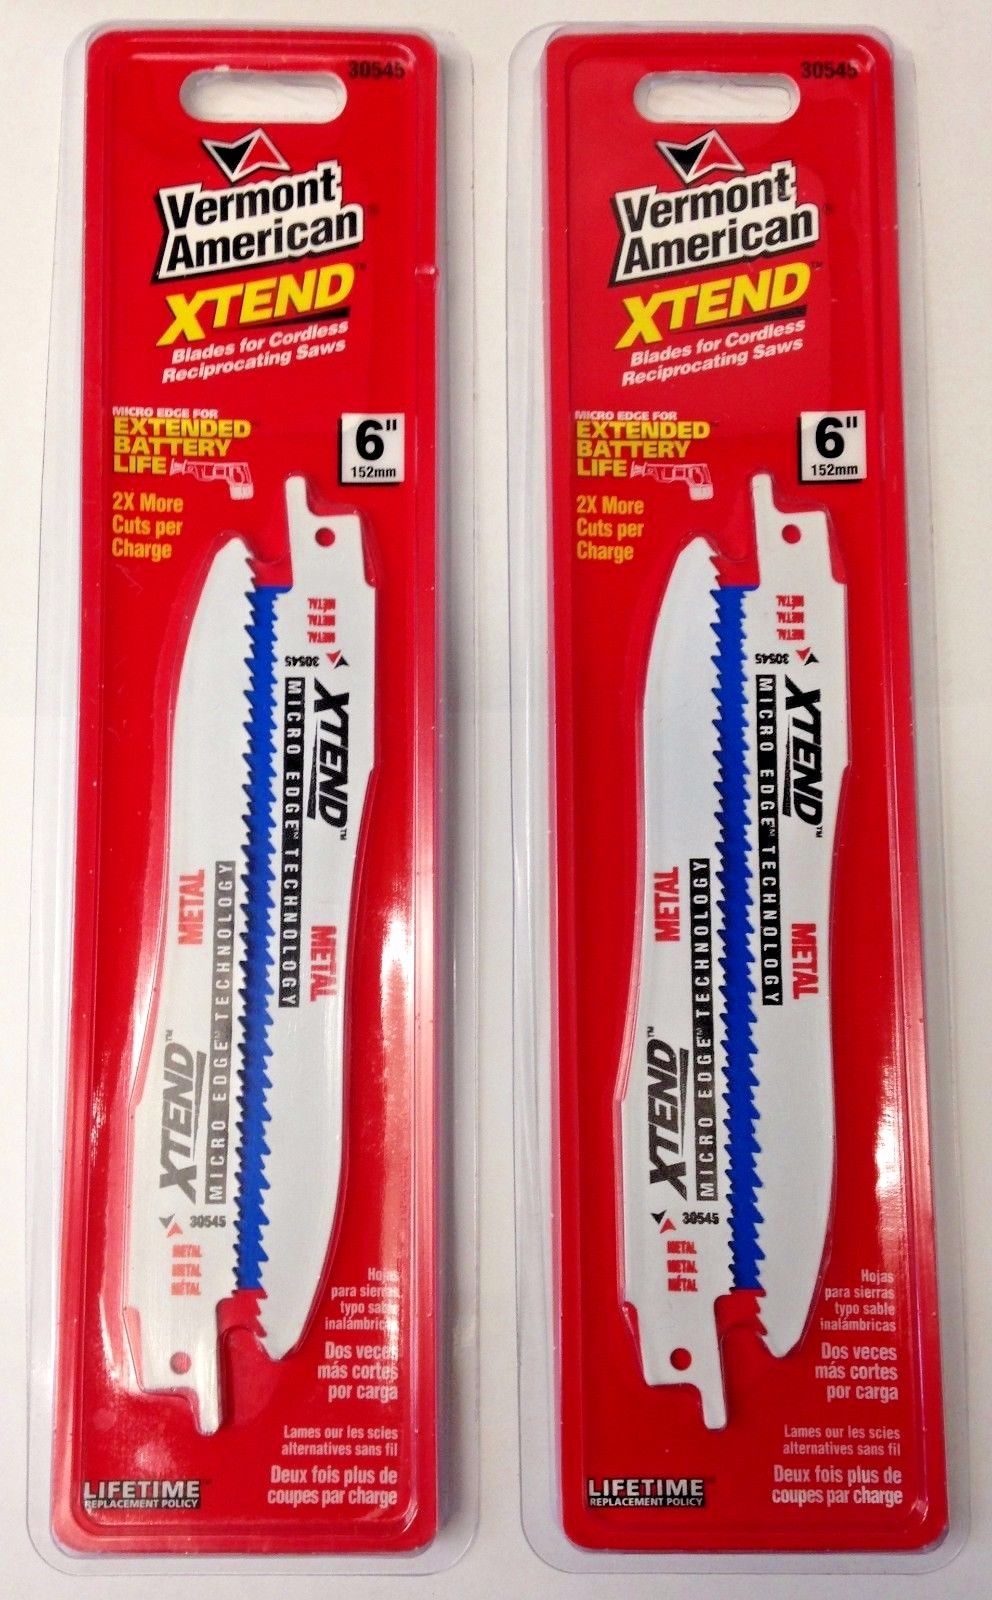 Vermont American 30545 6" Metal Blades for Cordless Reciprocating Saws 2-2 PKS